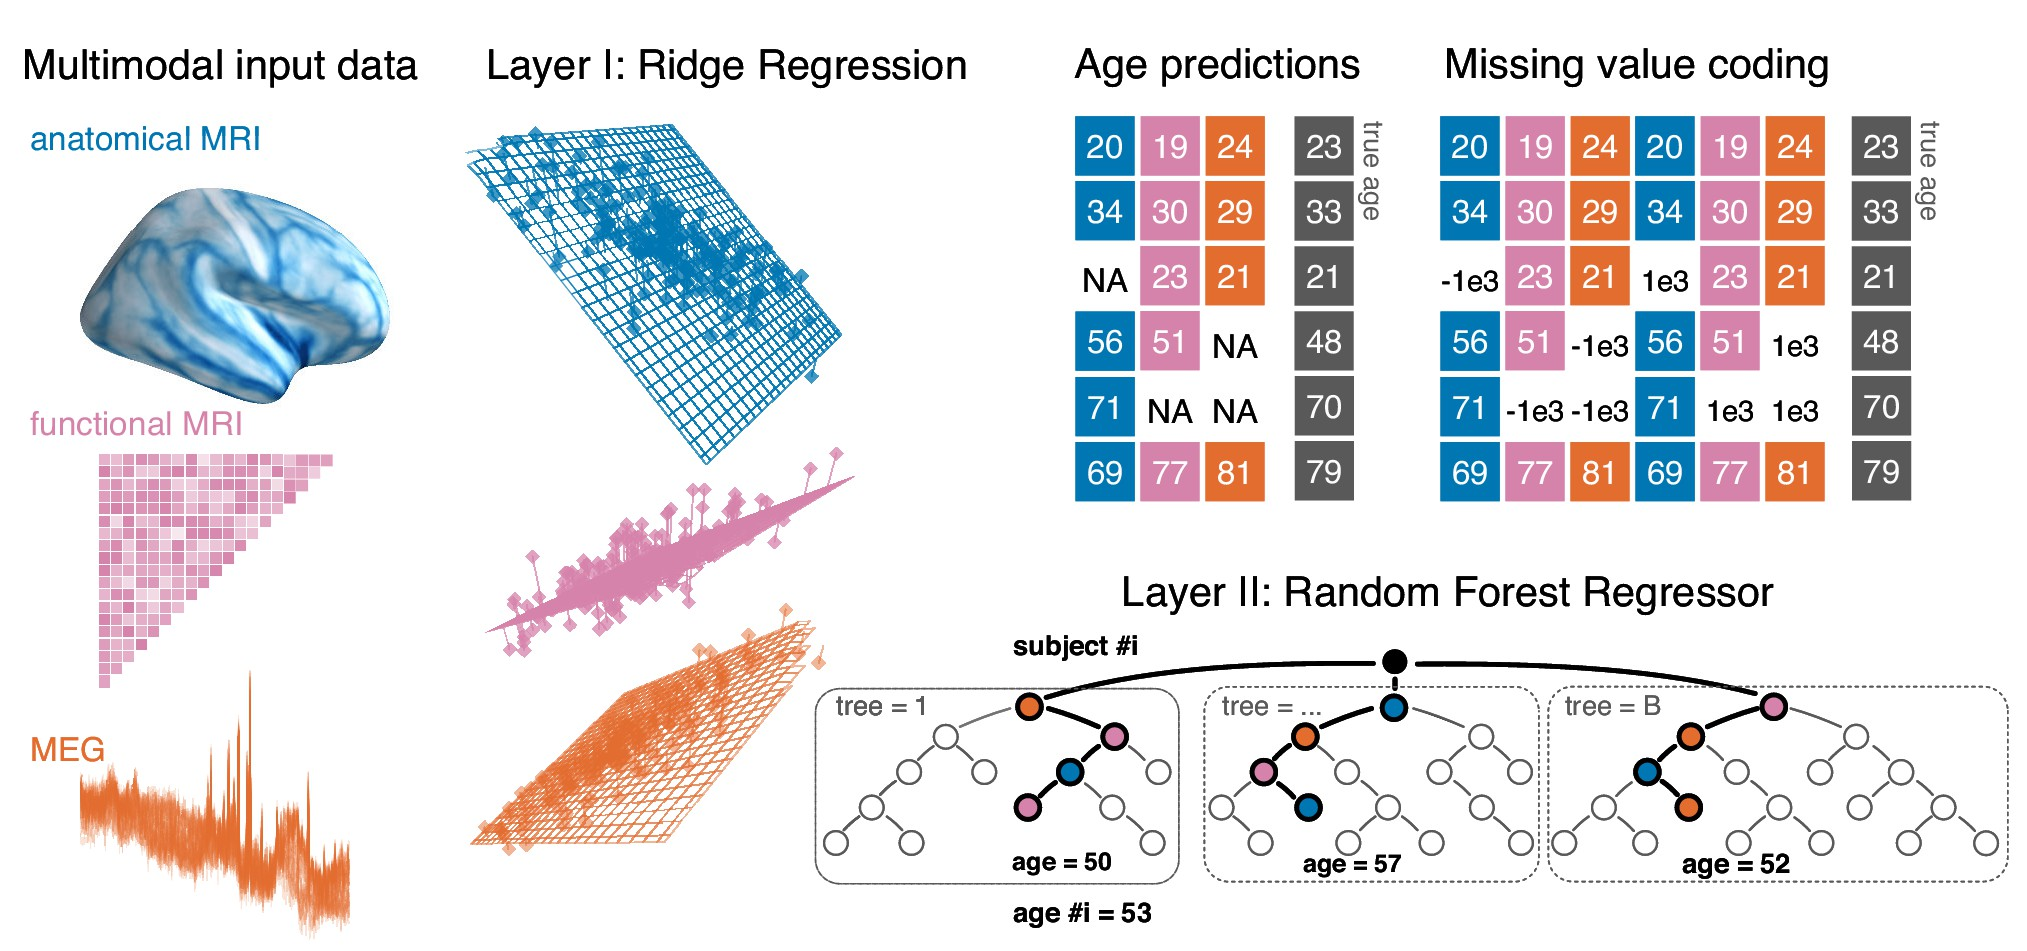 Opportunistic stacking approach. The proposed method allows to learn from any case for which at least one modality is available. The stacking model first generates, separately for each modality, linear predictions of age for held-out data. 10-fold cross-validation with 10 repeats is used. This step, based on ridge regression, helps reduce the dimensionality of the data by generating predictions based on linear combinations of the major directions of variance within each modality. The predicted age is then used as derived set of features in the following steps. First, missing values are handled by a coding-scheme that duplicates the second-level data and substitutes missing values with arbitrary small and large numbers. A random forest model is then trained to predict the actual age with the missing-value coded age-predictions from each ridge model as input features. This potentially helps improve prediction performance by combining additive information and introducing non-linear regression on a lower-dimensional representation.